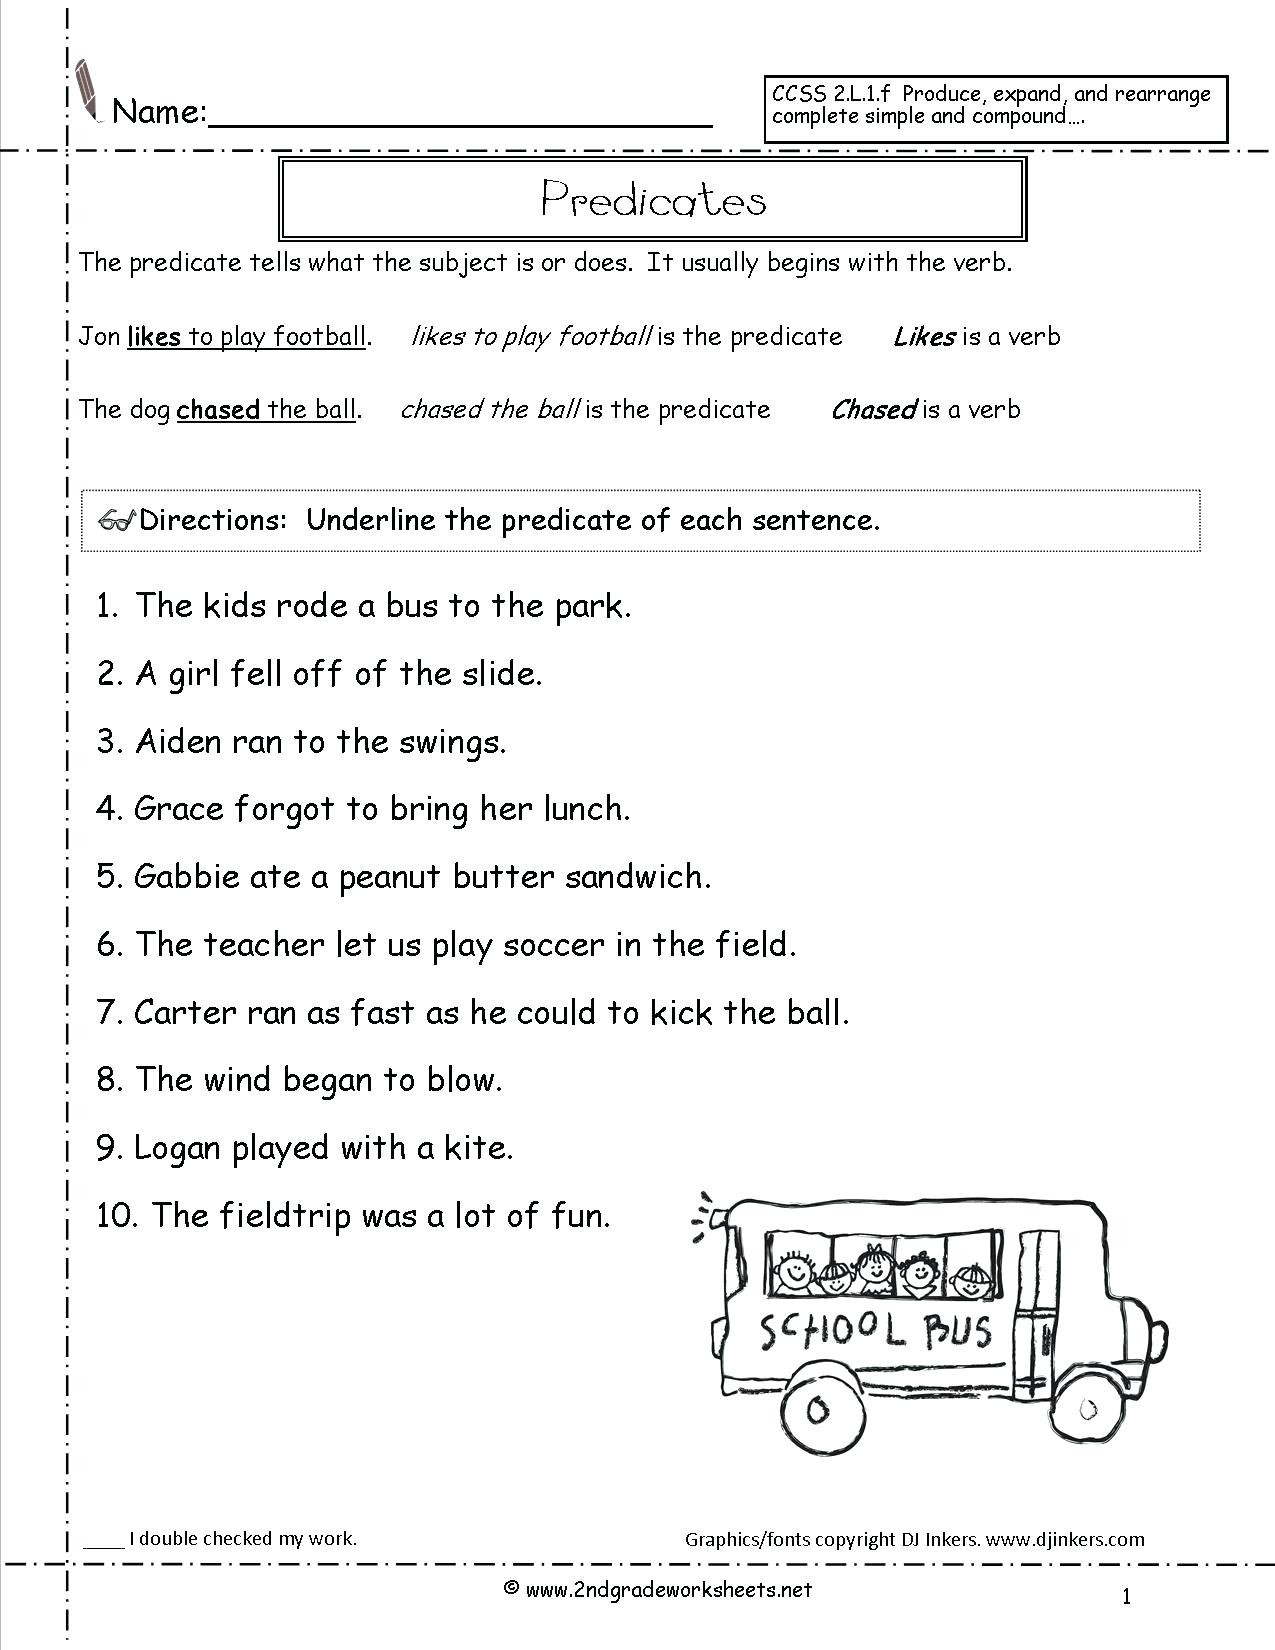 Free Printable Sentence Structure Worksheets Free Sentence Structure Worksheets Sentence Worksheet